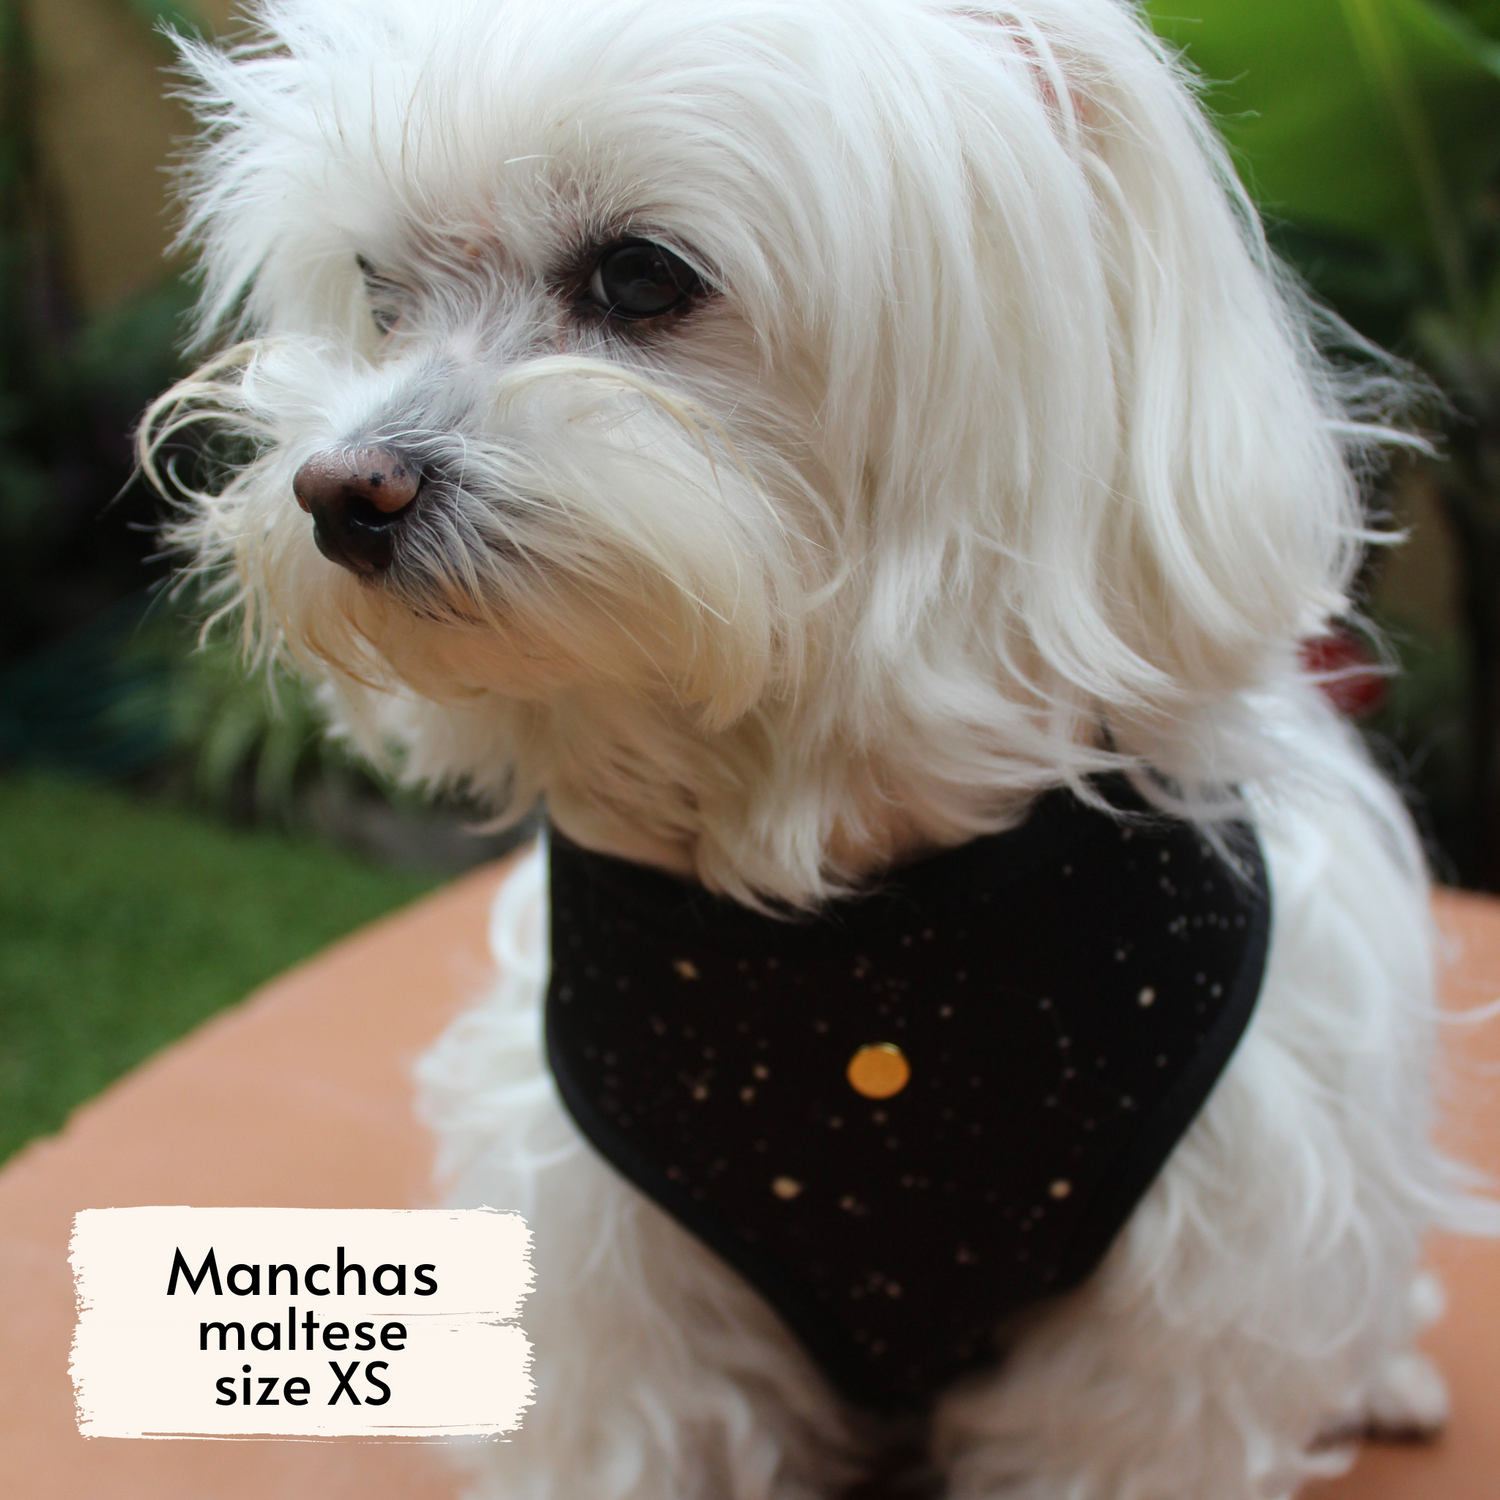 Pata Paw space explorer harness as seen on a XS dog, Manchas, a maltese